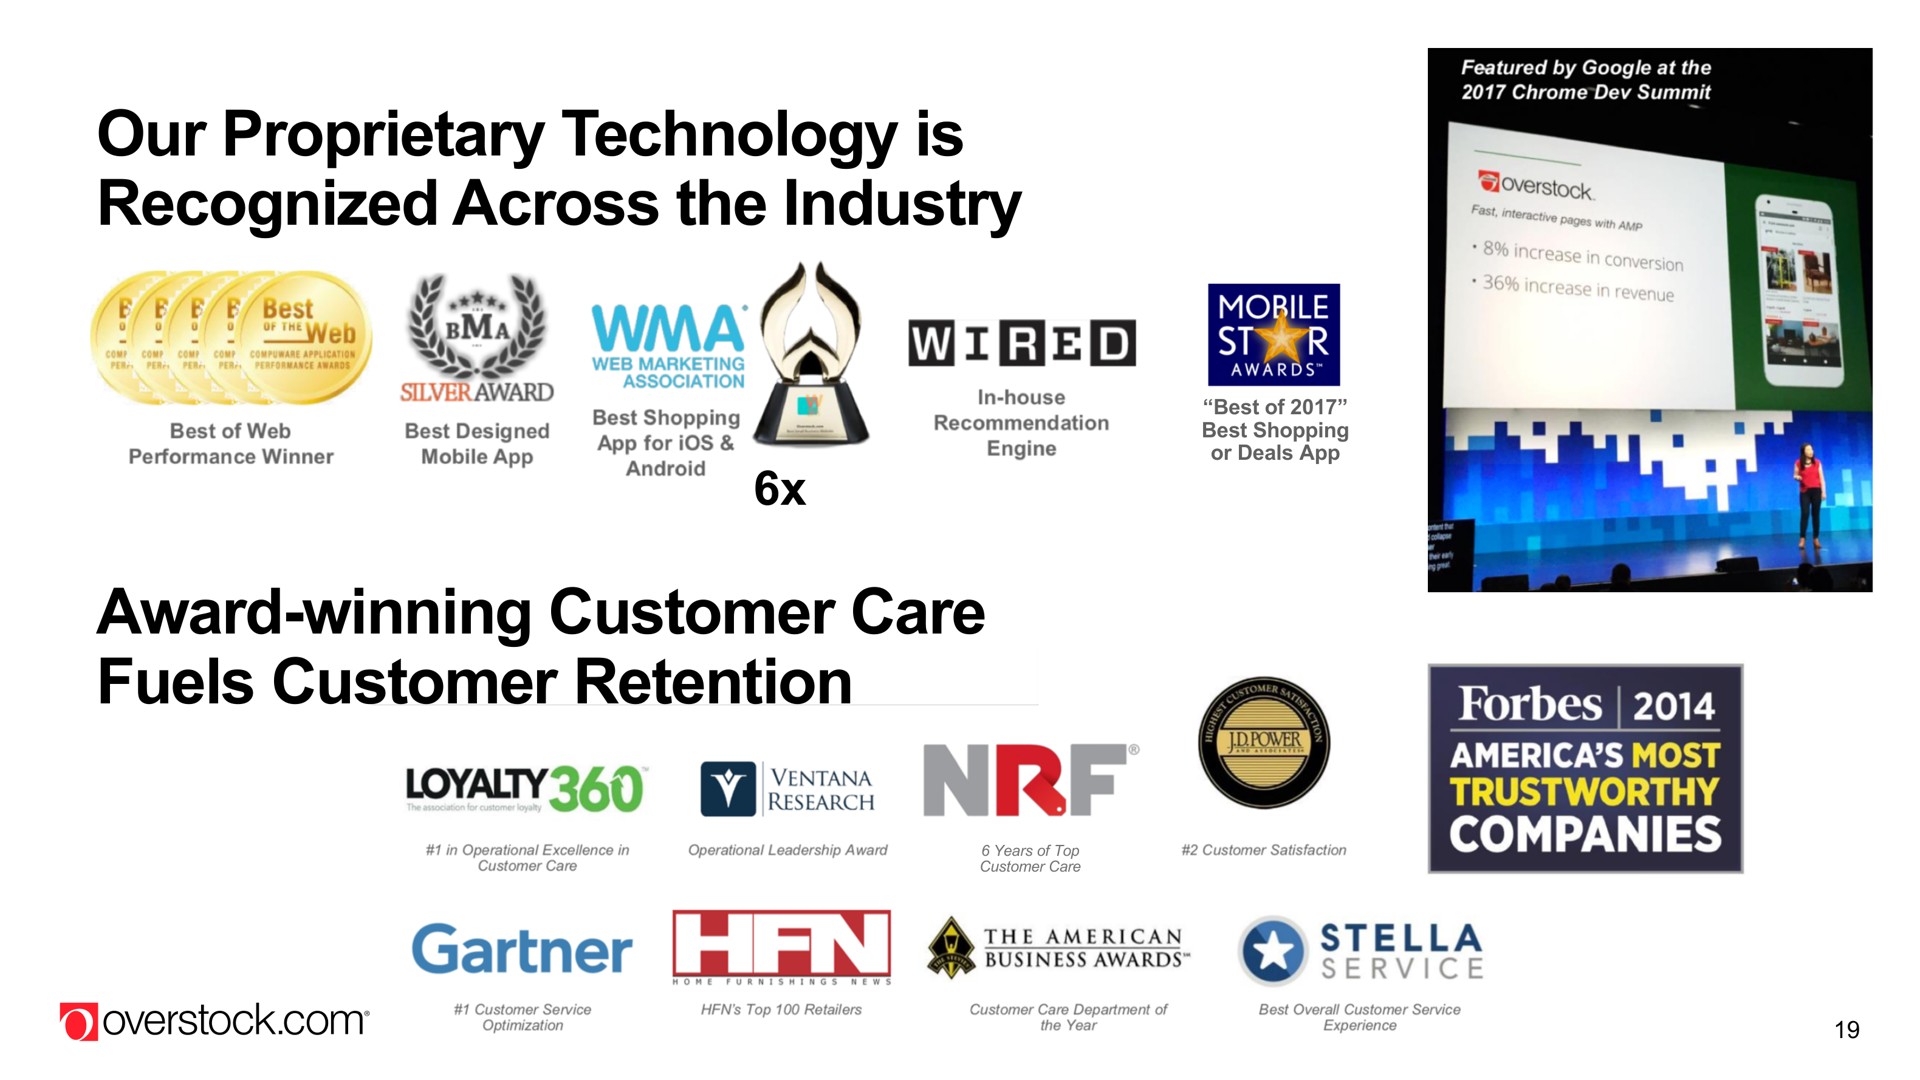 our proprietary technology is recognized across the industry award winning customer care fuels customer retention vive a a loyalty an i oer most sin stella | Overstock